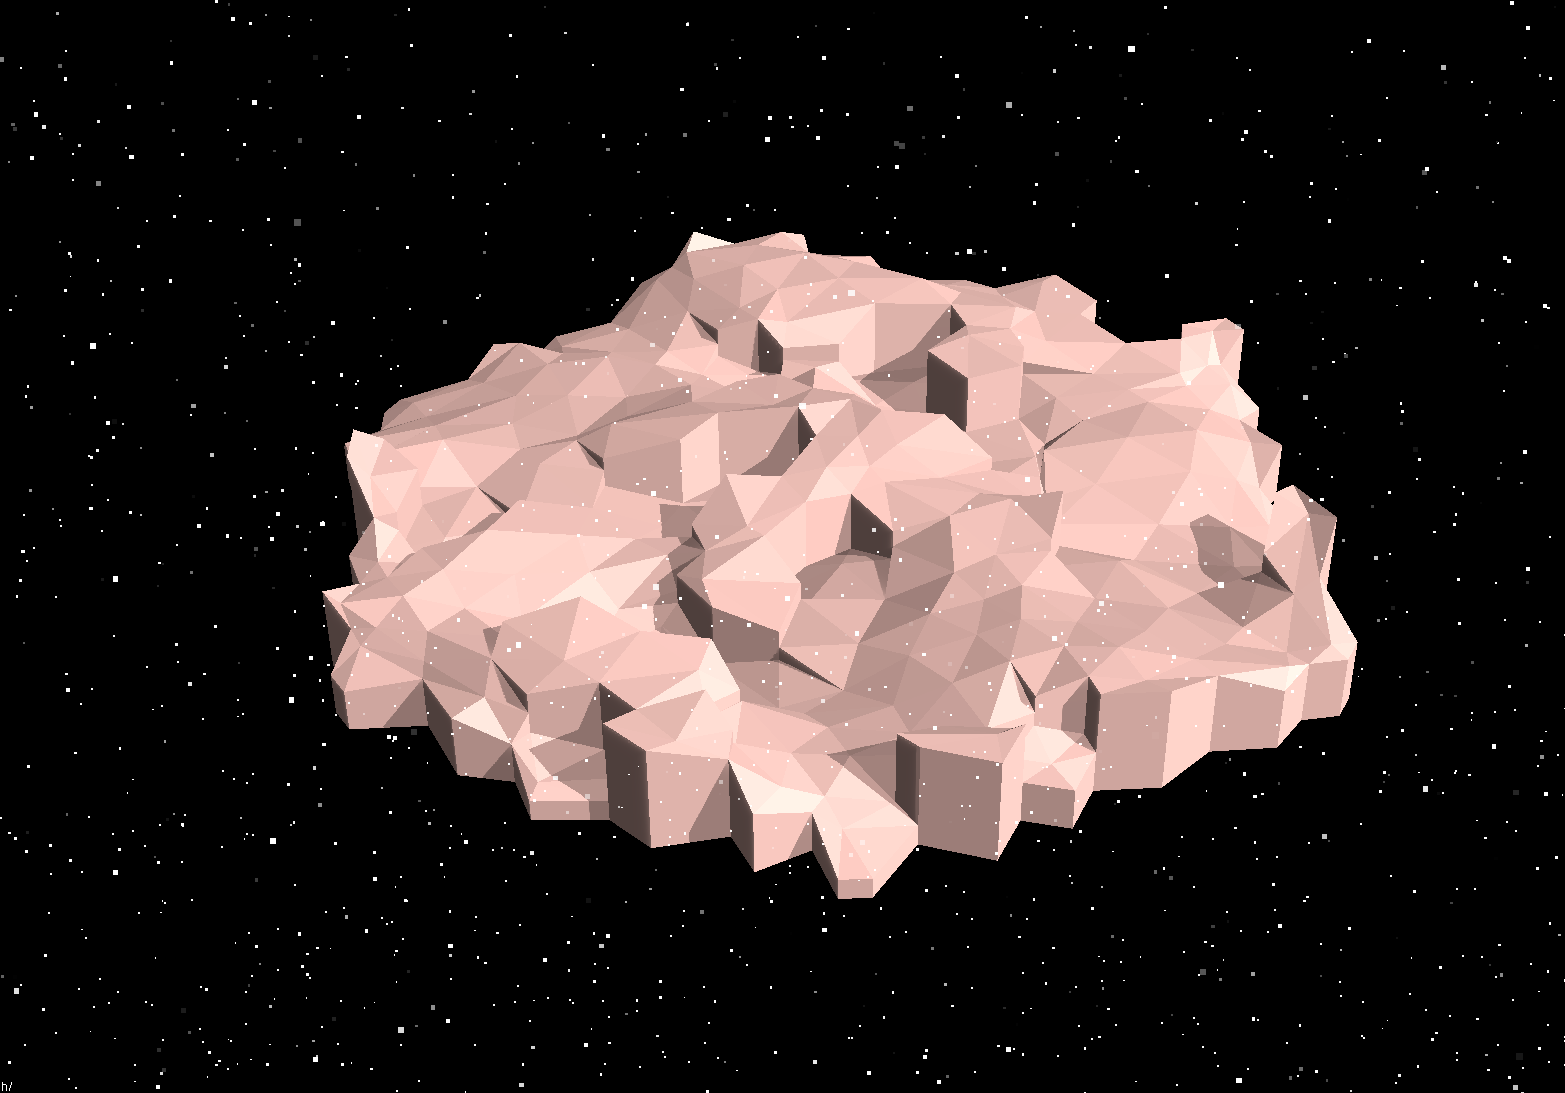 With voronoi and smoothing enabled